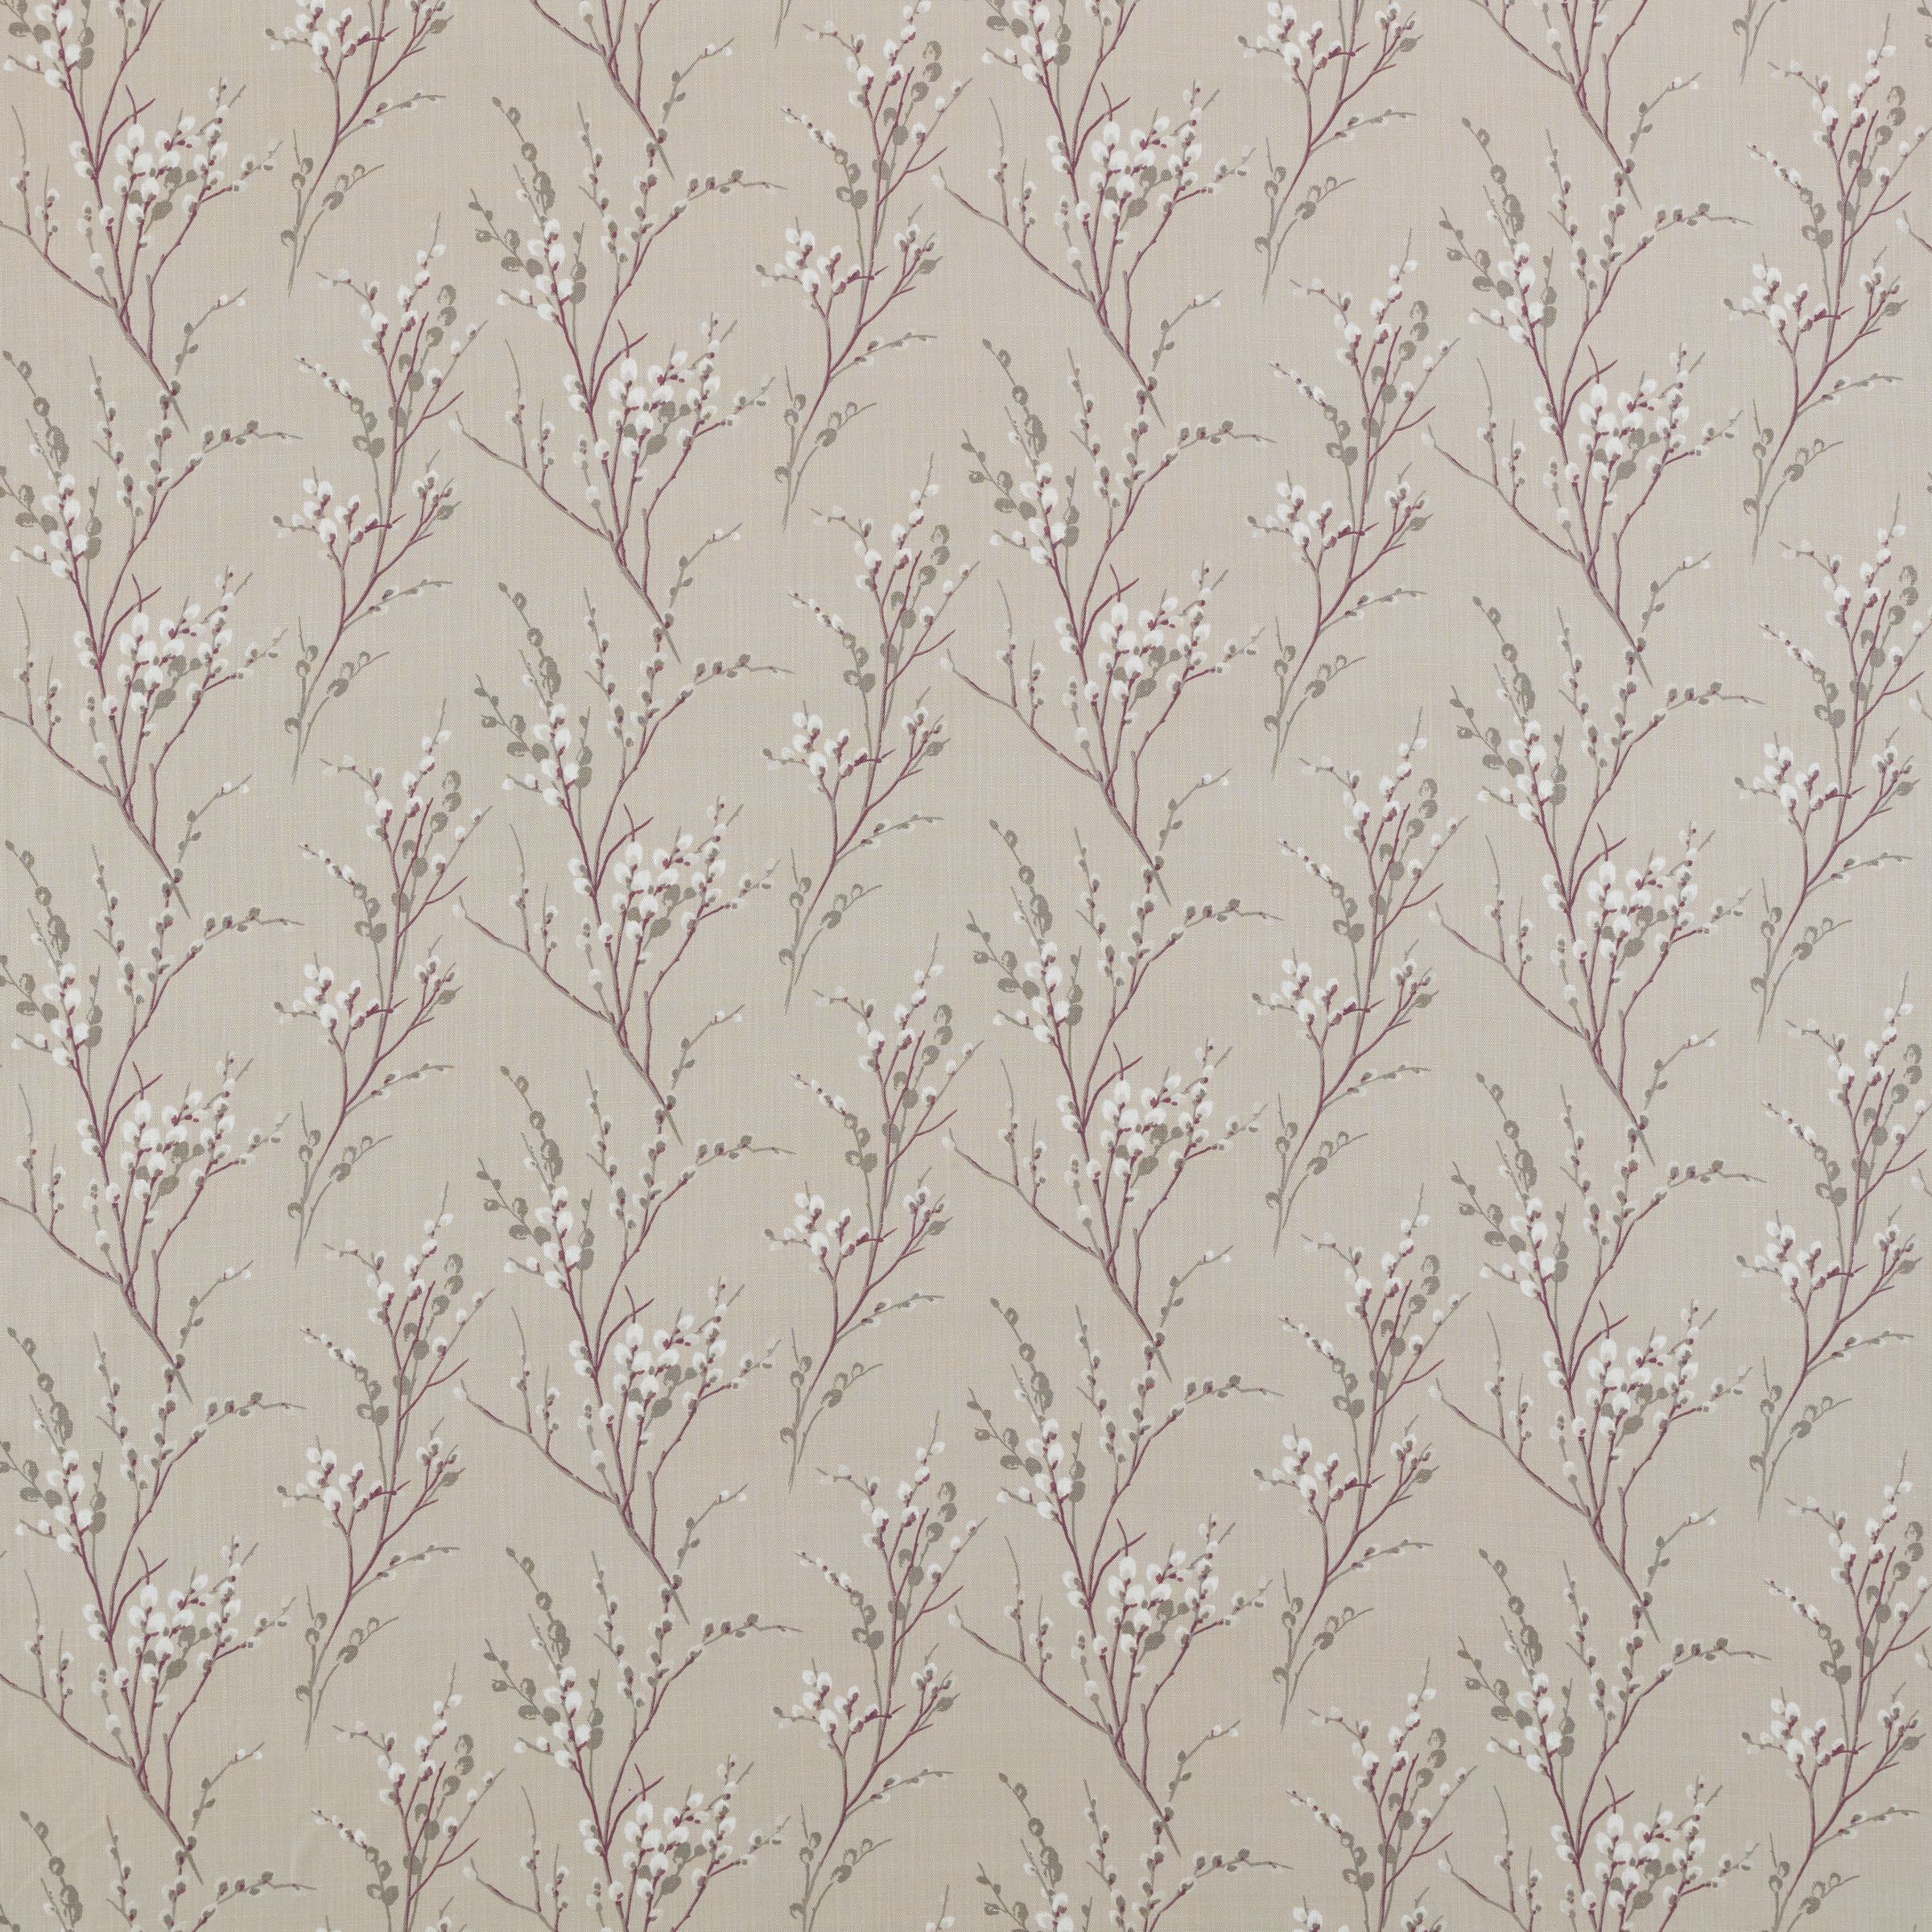 Laura Ashley Pussy Willow Furnishing Fabric, Natural